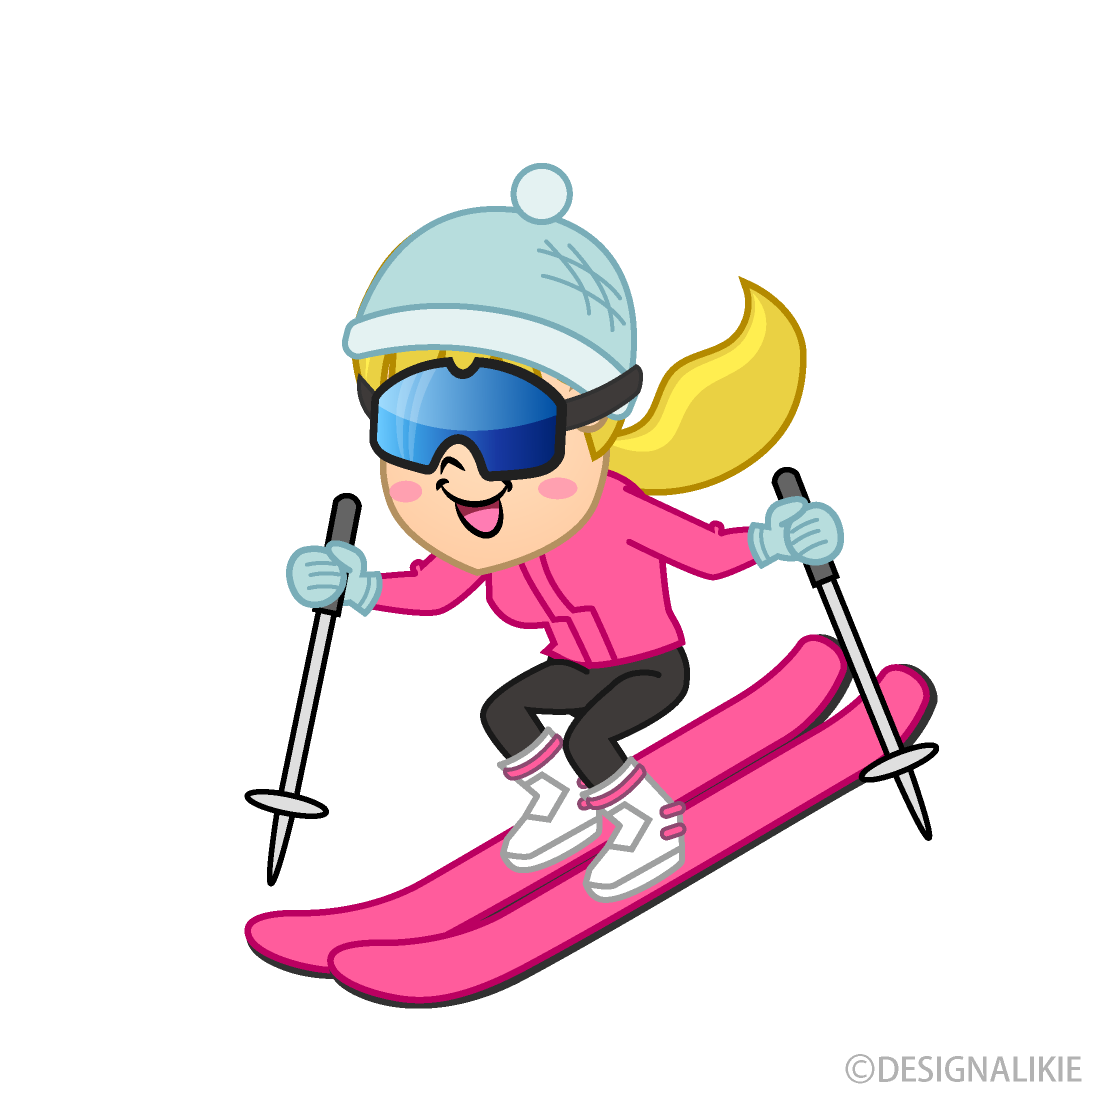 Girl Skiing at High Speed